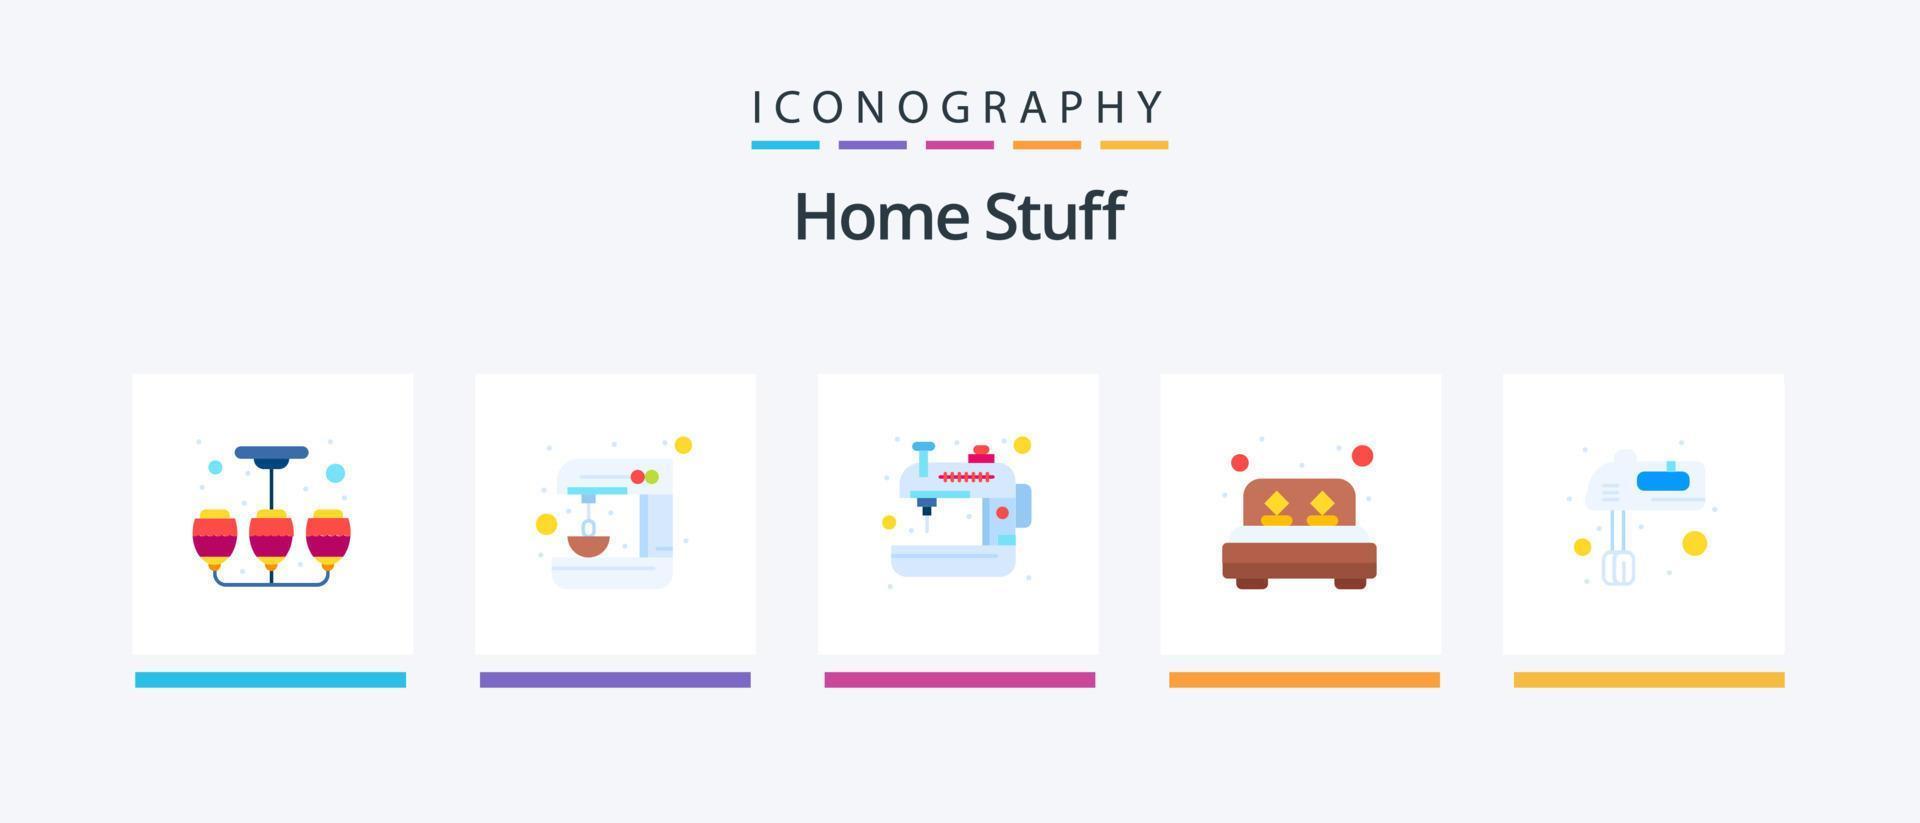 Home Stuff Flat 5 Icon Pack Including kitchen. bed room. appliance. room. bed. Creative Icons Design vector